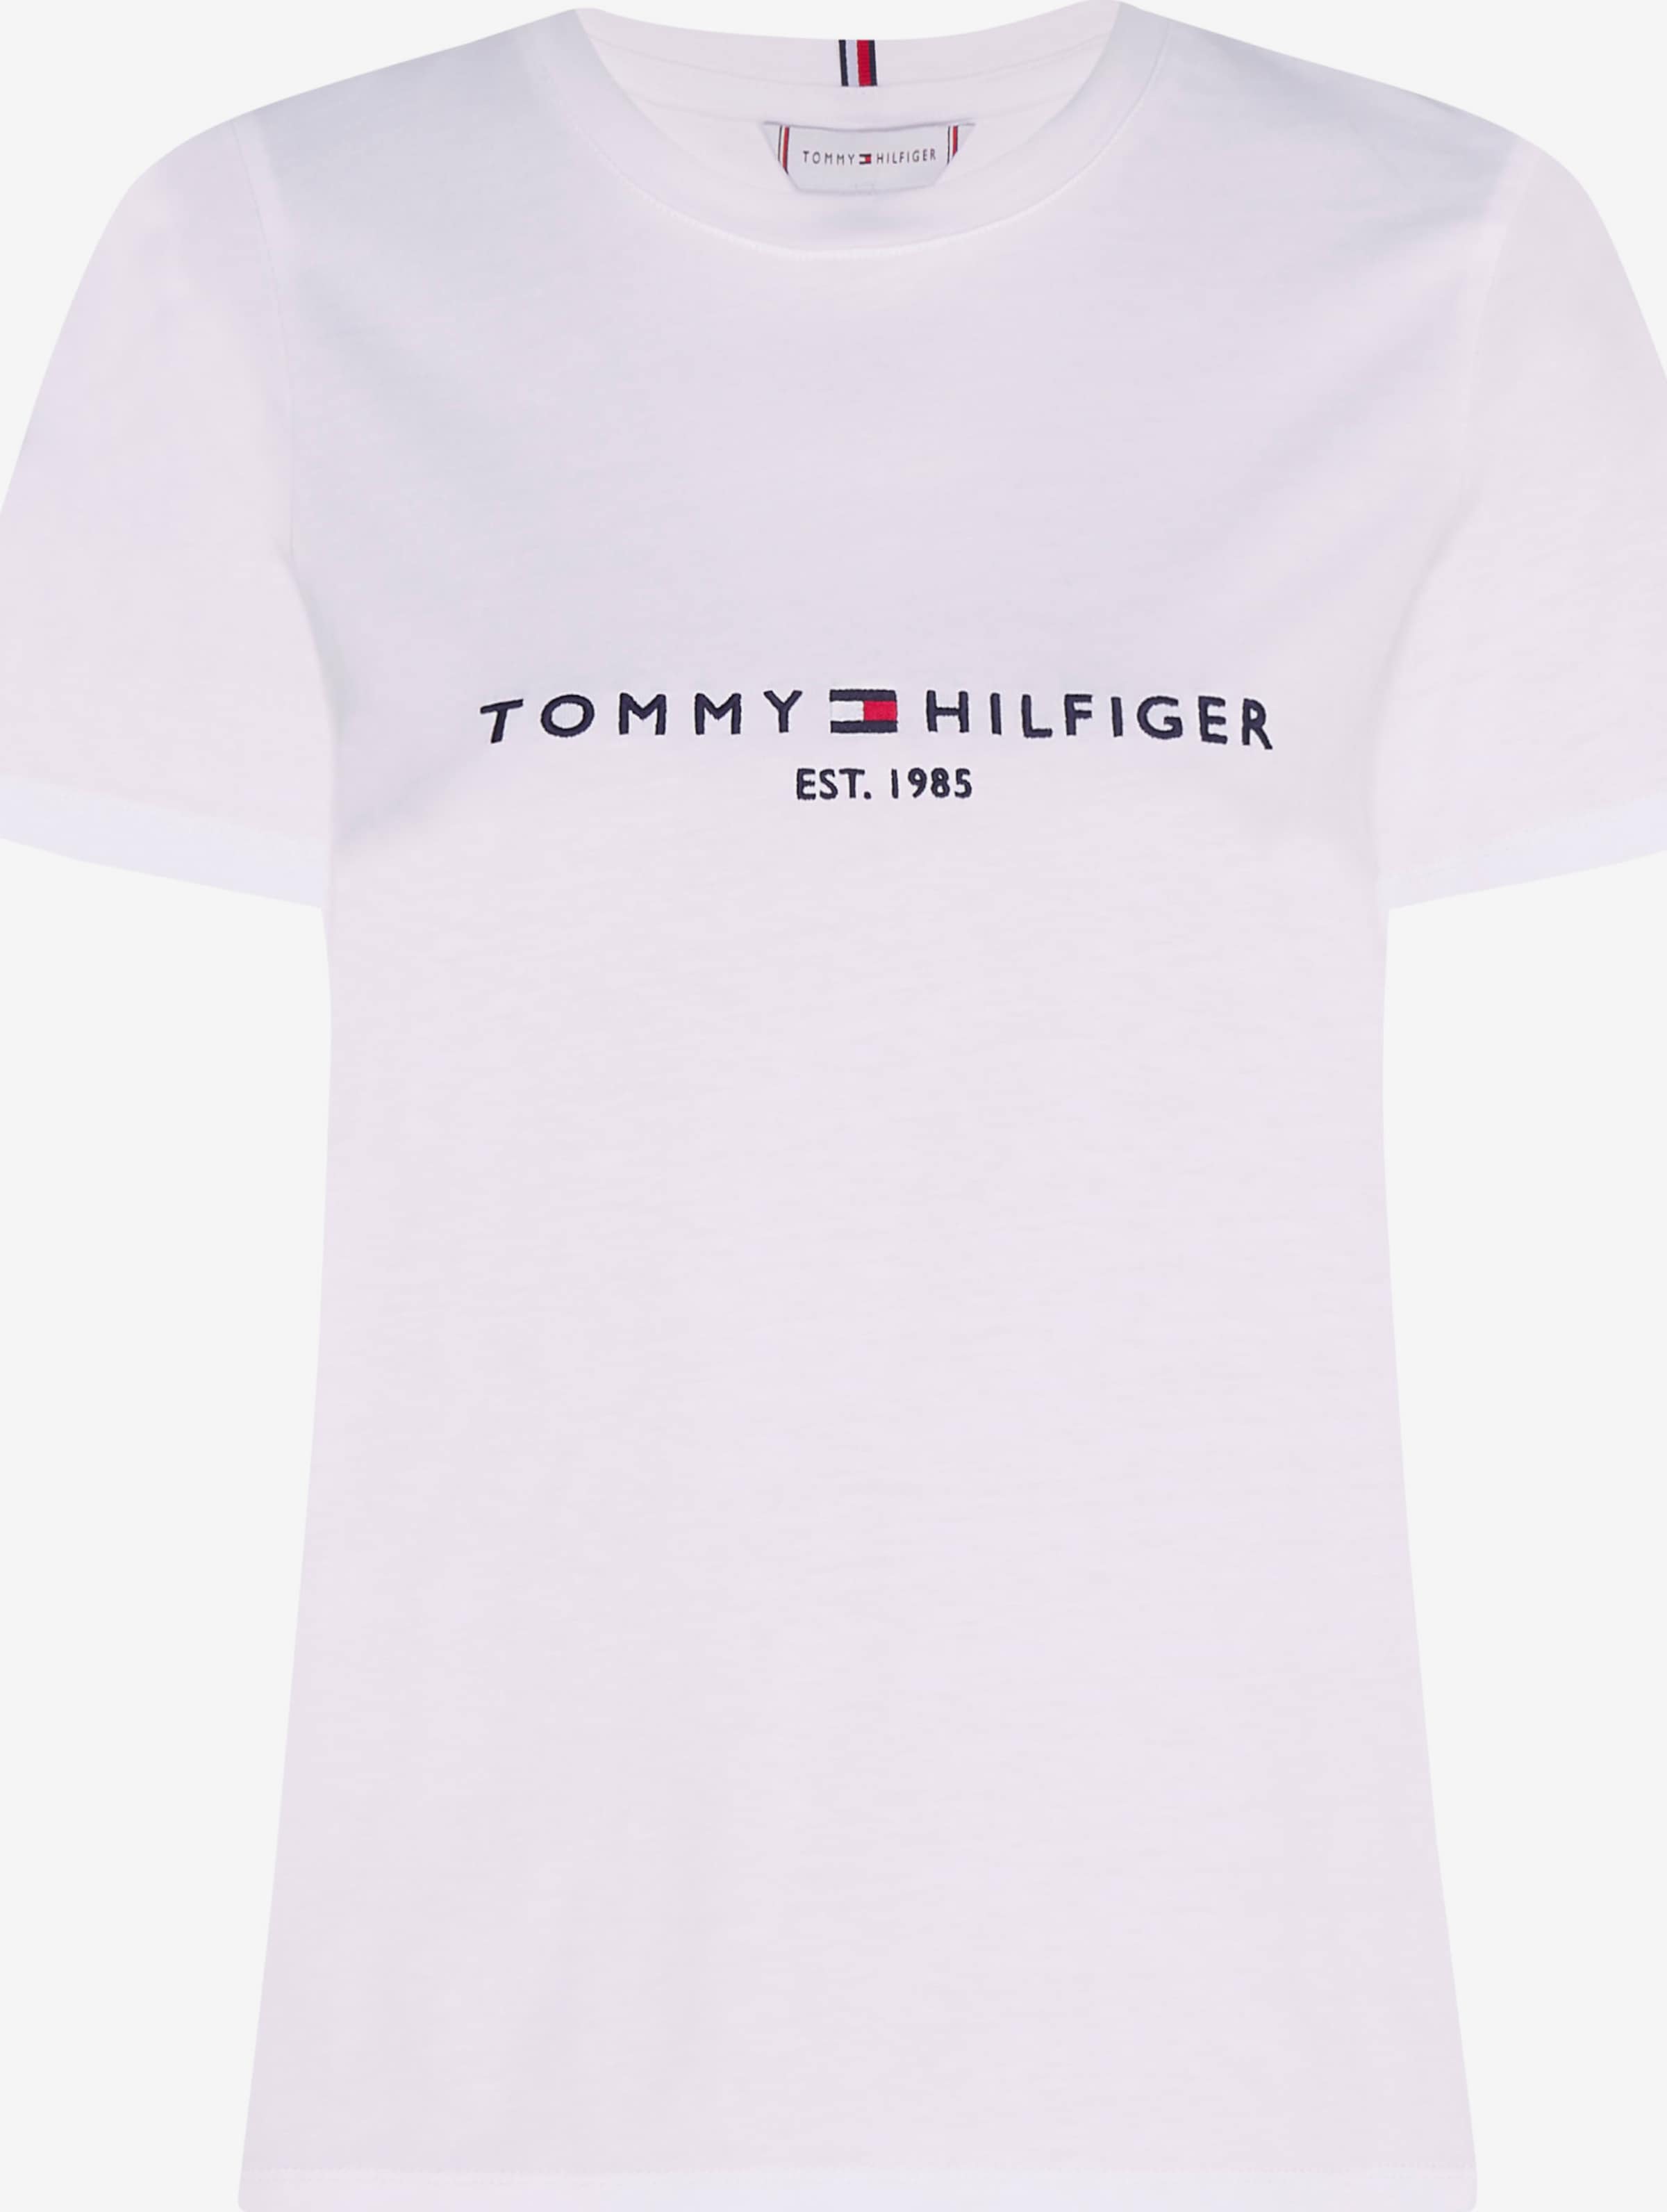 Wetland Verkeersopstopping Geld lenende TOMMY HILFIGER Shirt in White | ABOUT YOU